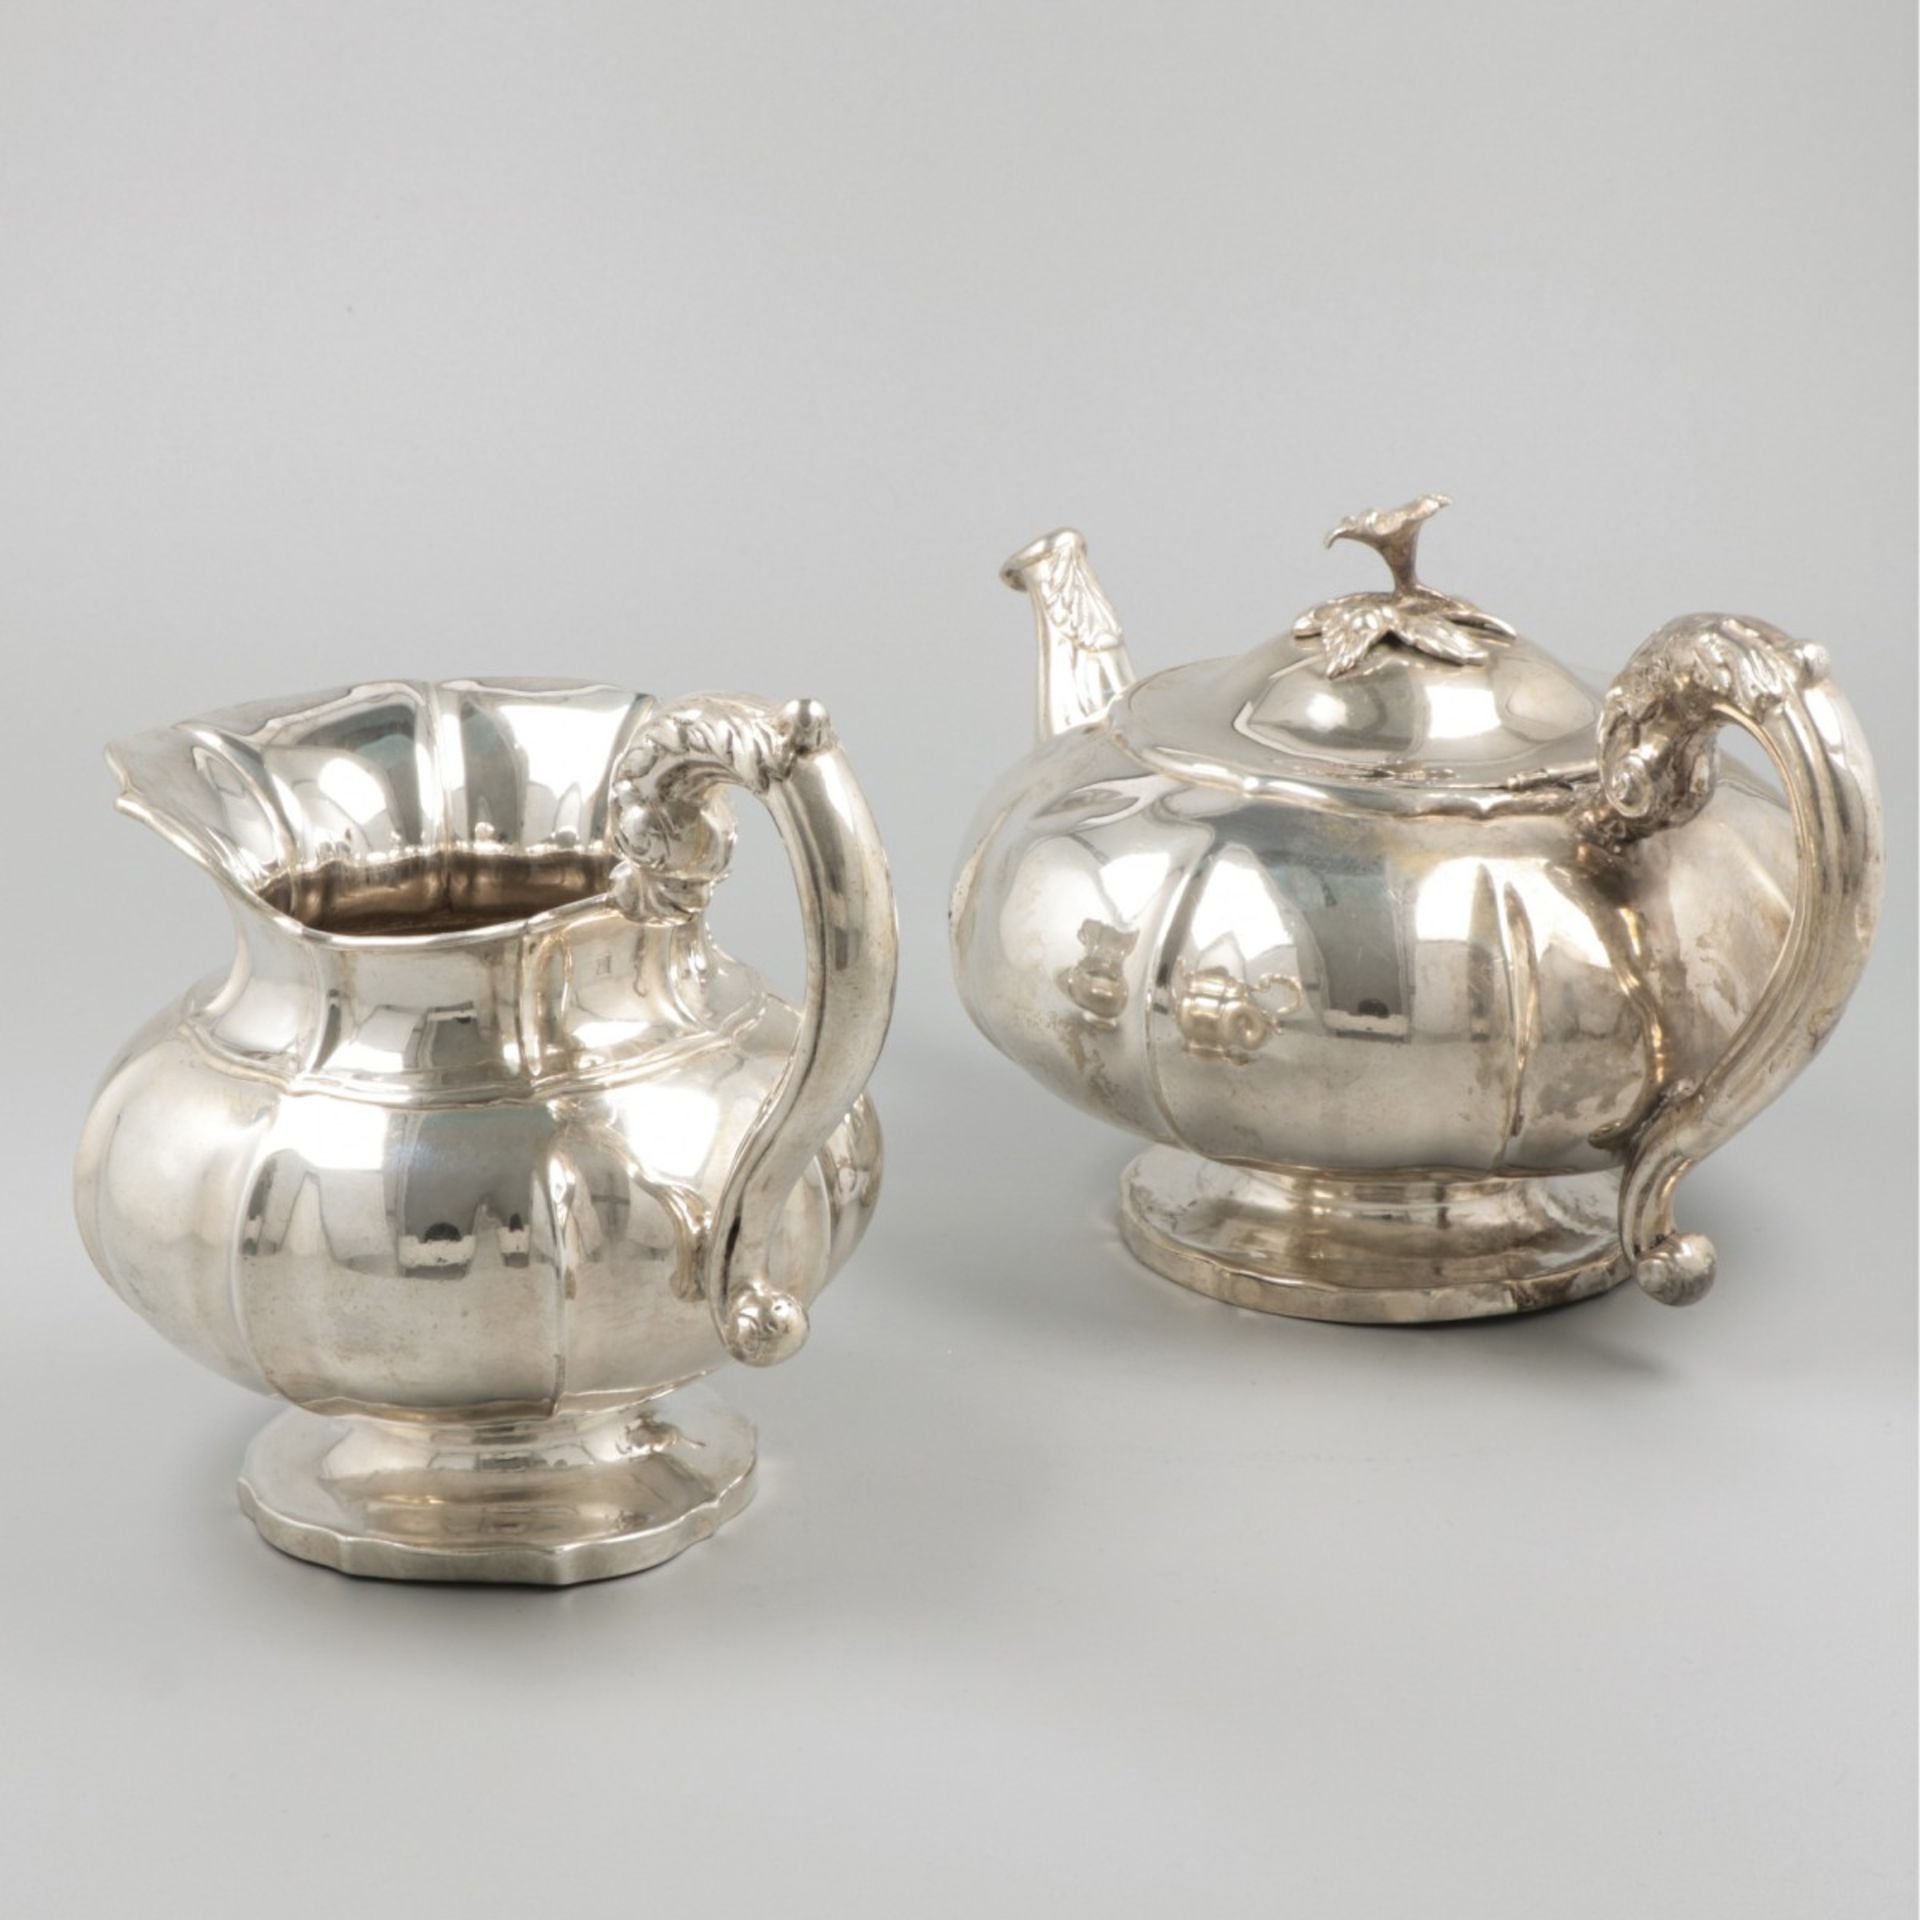 Teapot and milk jug silver. - Image 2 of 9